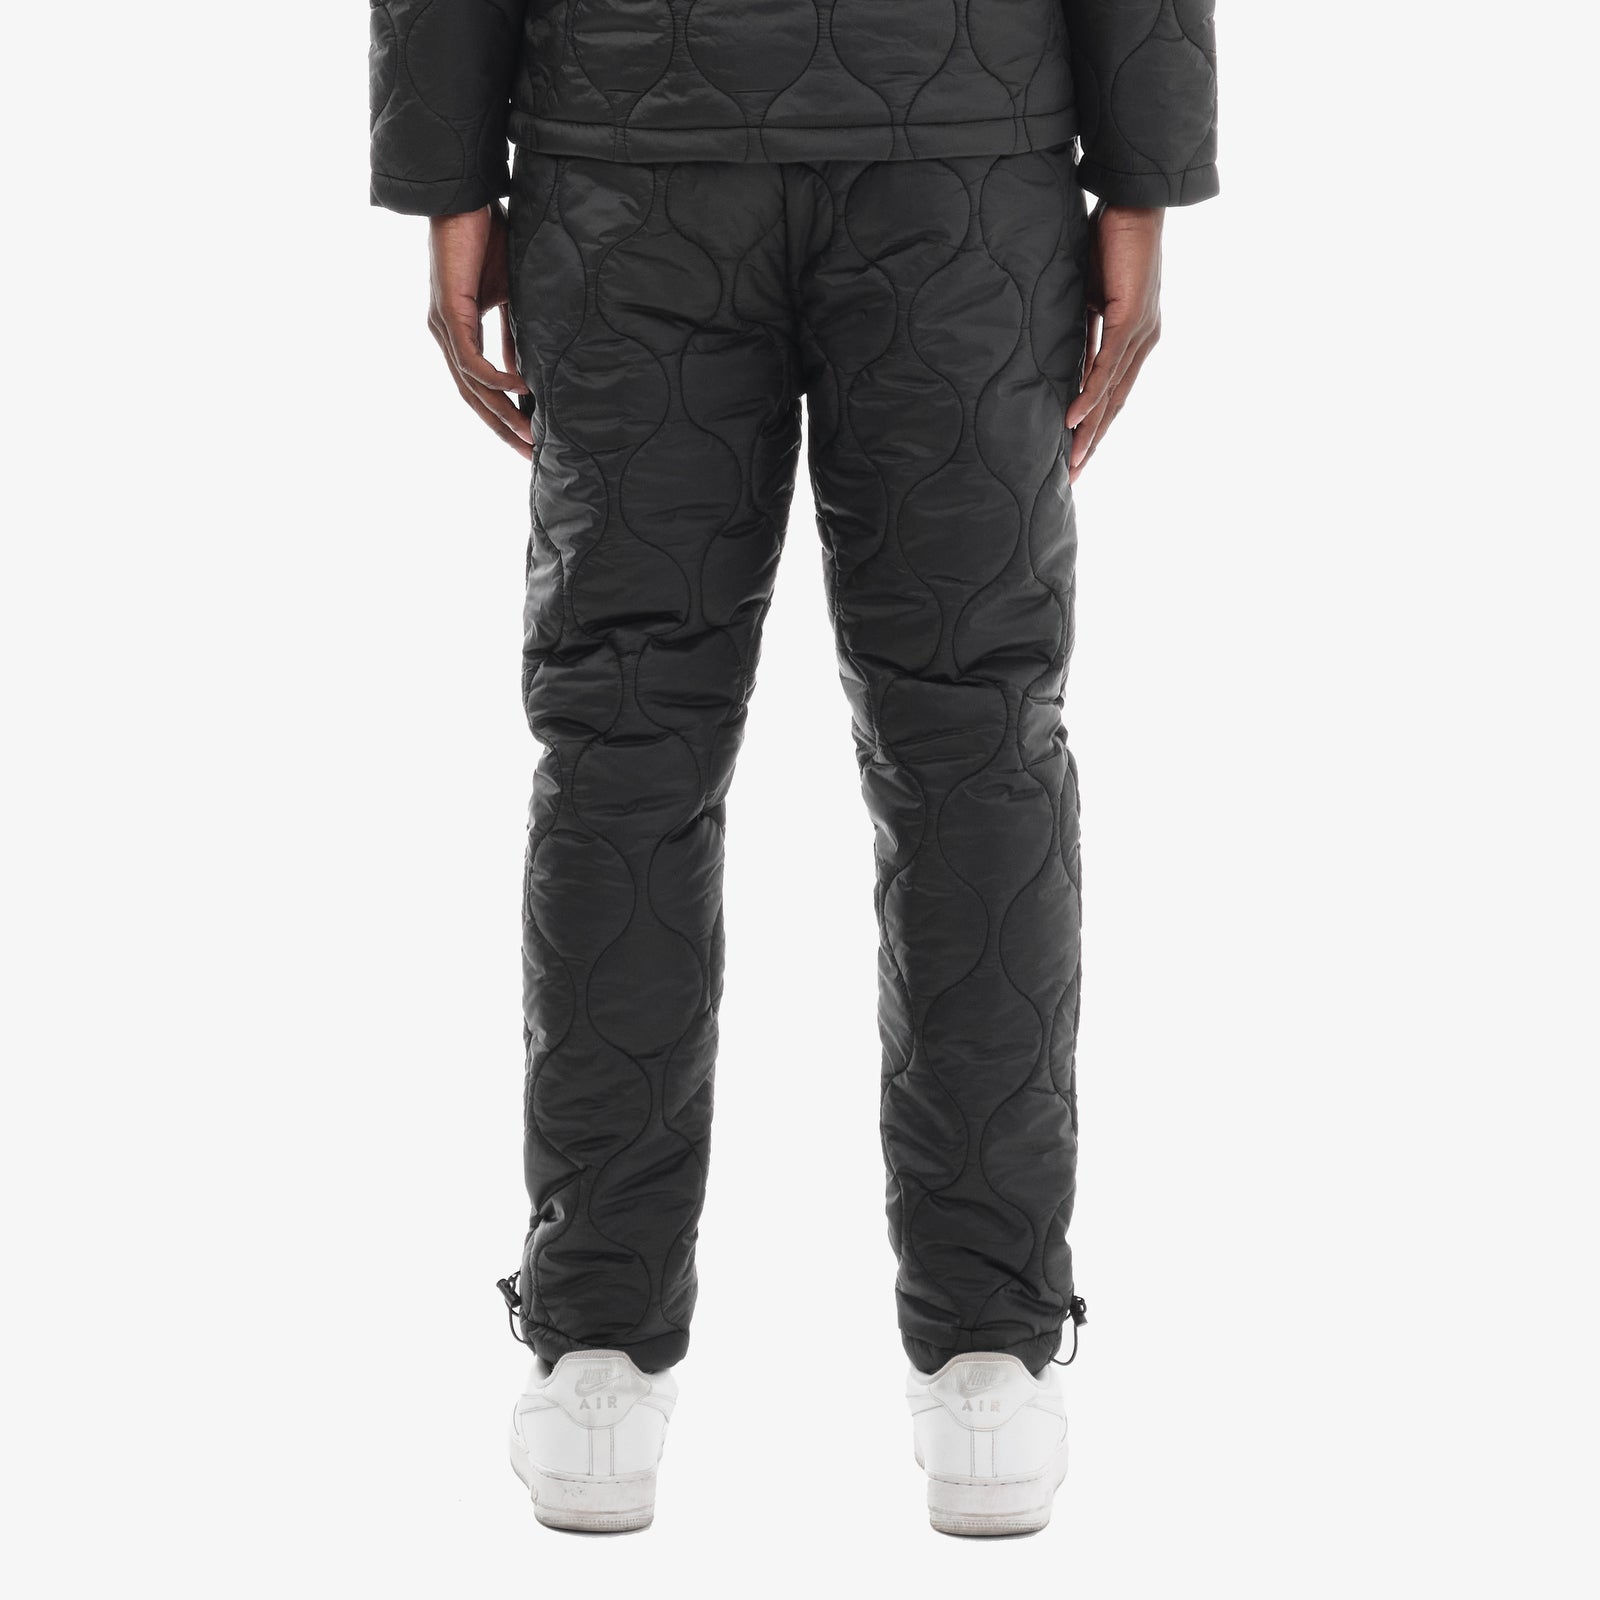 LIFE CODE BLACK QUILTED PANTS